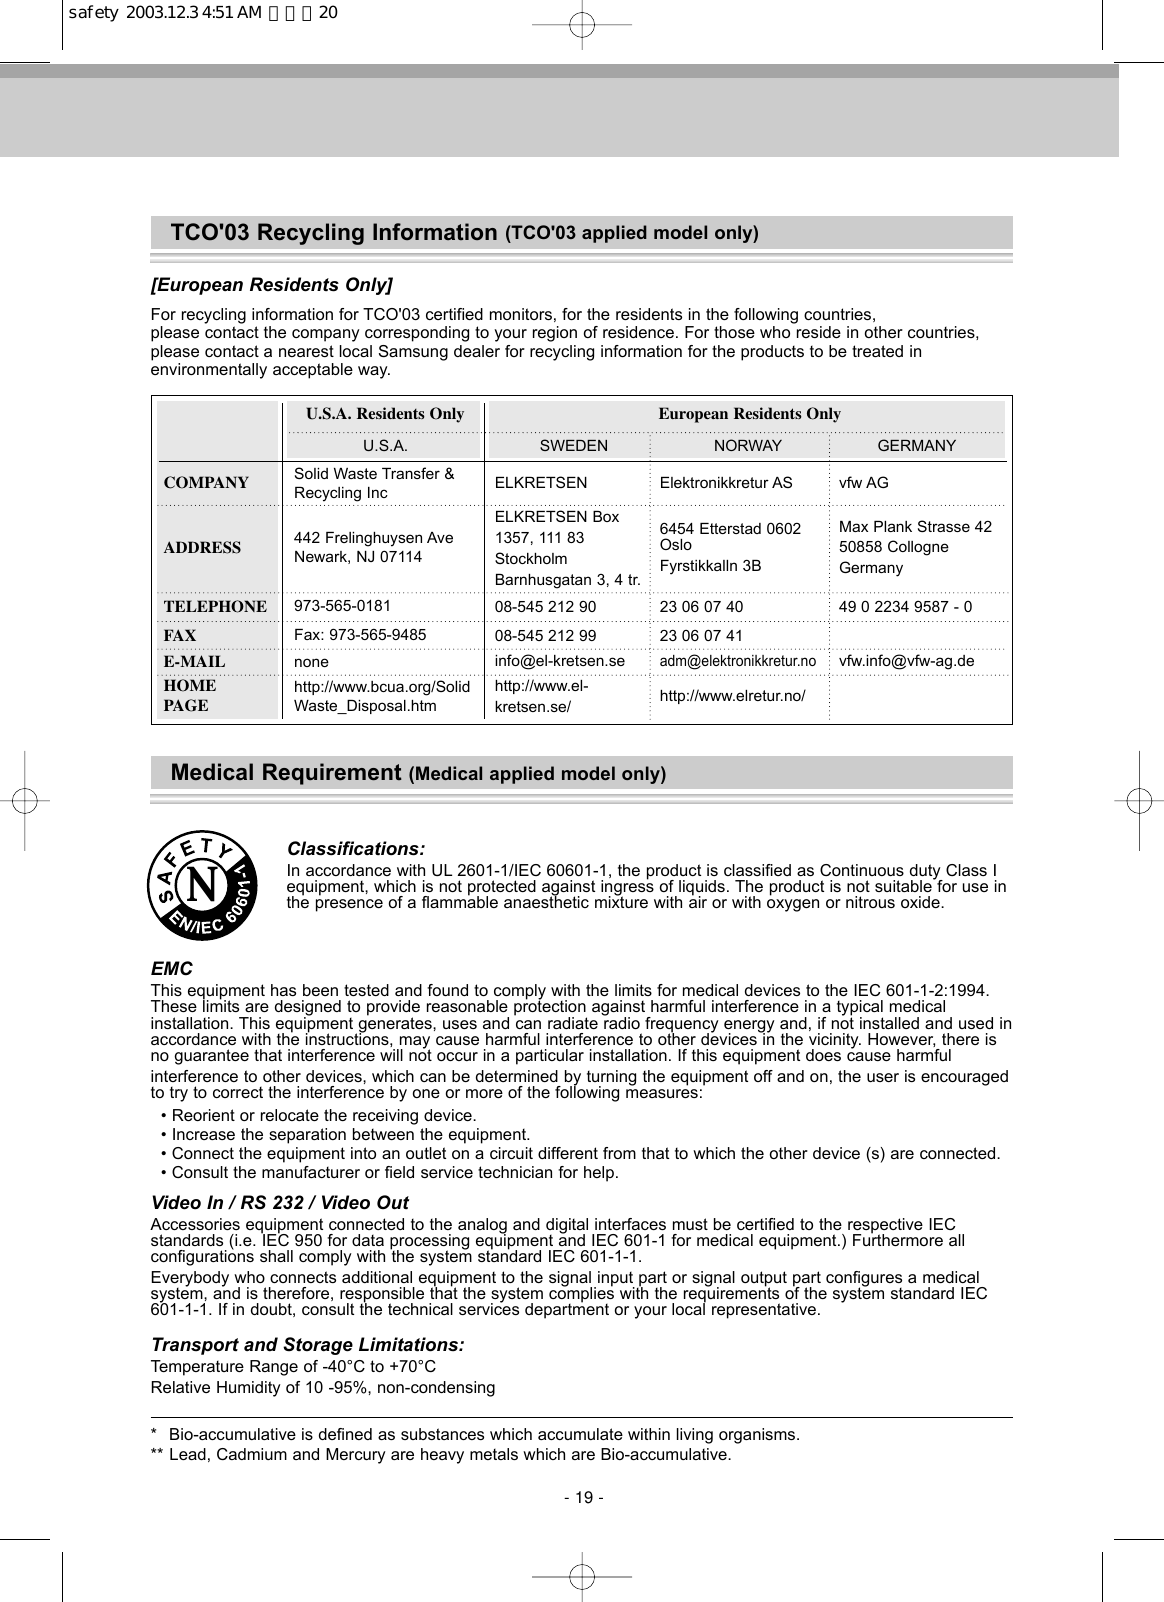 TCO&apos;03 Recycling Information (TCO&apos;03 applied model only)Medical Requirement (Medical applied model only)[European Residents Only]For recycling information for TCO&apos;03 certified monitors, for the residents in the following countries,please contact the company corresponding to your region of residence. For those who reside in other countries, please contact a nearest local Samsung dealer for recycling information for the products to be treated inenvironmentally acceptable way.Classifications:In accordance with UL 2601-1/IEC 60601-1, the product is classified as Continuous duty Class Iequipment, which is not protected against ingress of liquids. The product is not suitable for use inthe presence of a flammable anaesthetic mixture with air or with oxygen or nitrous oxide.EMCThis equipment has been tested and found to comply with the limits for medical devices to the IEC 601-1-2:1994.These limits are designed to provide reasonable protection against harmful interference in a typical medical installation. This equipment generates, uses and can radiate radio frequency energy and, if not installed and used inaccordance with the instructions, may cause harmful interference to other devices in the vicinity. However, there isno guarantee that interference will not occur in a particular installation. If this equipment does cause harmfulinterference to other devices, which can be determined by turning the equipment off and on, the user is encouragedto try to correct the interference by one or more of the following measures:• Reorient or relocate the receiving device.• Increase the separation between the equipment.• Connect the equipment into an outlet on a circuit different from that to which the other device (s) are connected.• Consult the manufacturer or field service technician for help.Video In / RS 232 / Video OutAccessories equipment connected to the analog and digital interfaces must be certified to the respective IEC standards (i.e. IEC 950 for data processing equipment and IEC 601-1 for medical equipment.) Furthermore all configurations shall comply with the system standard IEC 601-1-1.Everybody who connects additional equipment to the signal input part or signal output part configures a medicalsystem, and is therefore, responsible that the system complies with the requirements of the system standard IEC601-1-1. If in doubt, consult the technical services department or your local representative.Transport and Storage Limitations:Temperature Range of -40°C to +70°CRelative Humidity of 10 -95%, non-condensing* Bio-accumulative is defined as substances which accumulate within living organisms.** Lead, Cadmium and Mercury are heavy metals which are Bio-accumulative.COMPANYU.S.A. Residents Only European Residents OnlyU.S.A. SWEDEN NORWAY GERMANY49 0 2234 9587 - 0vfw.info@vfw-ag.devfw AGMax Plank Strasse 4250858 CollogneGermanyElektronikkretur AS23 06 07 4023 06 07 41adm@elektronikkretur.nohttp://www.elretur.no/6454 Etterstad 0602OsloFyrstikkalln 3B08-545 212 99info@el-kretsen.sehttp://www.el-kretsen.se/08-545 212 90ELKRETSENELKRETSEN Box1357, 111 83StockholmBarnhusgatan 3, 4 tr.Solid Waste Transfer &amp;Recycling Inc973-565-0181Fax: 973-565-9485nonehttp://www.bcua.org/SolidWaste_Disposal.htm442 Frelinghuysen AveNewark, NJ 07114ADDRESSTELEPHONEFAXE-MAILHOMEPAGEN- 19 -safety  2003.12.3 4:51 AM  페이지20